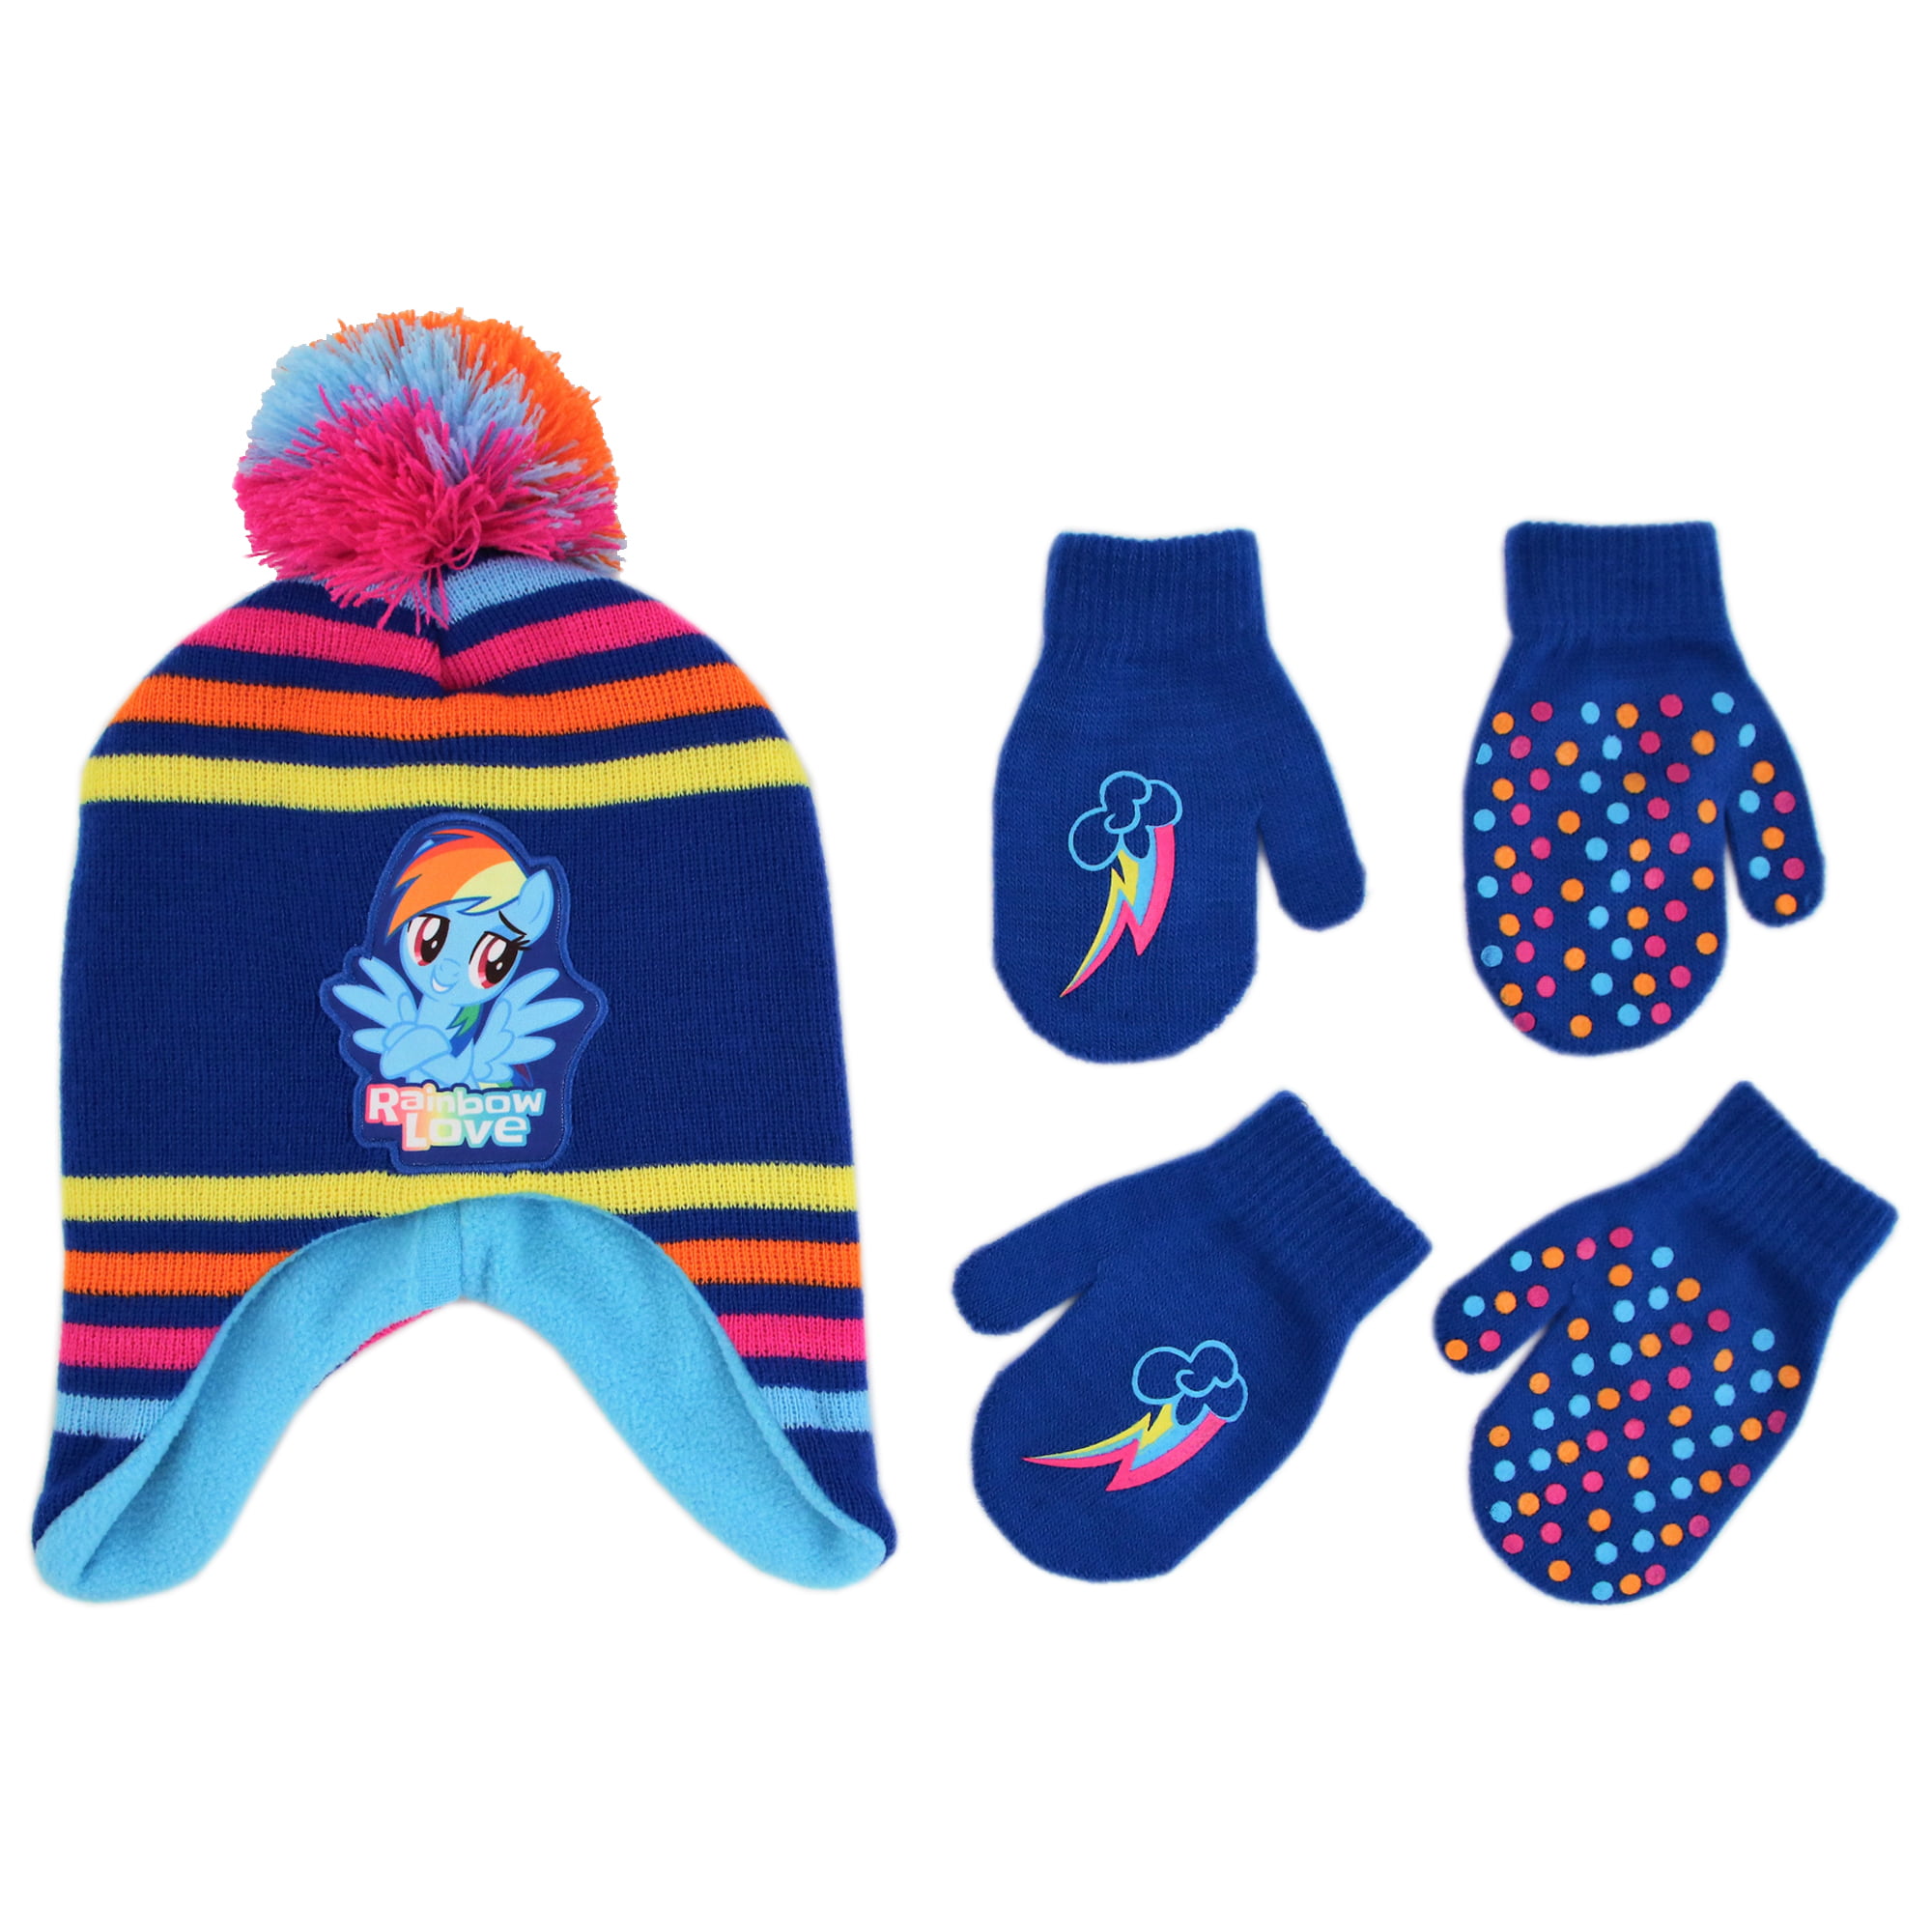 PJ Masks Scarf Hat and Gloves Or Mitten Set for Toddler and Little Boys 